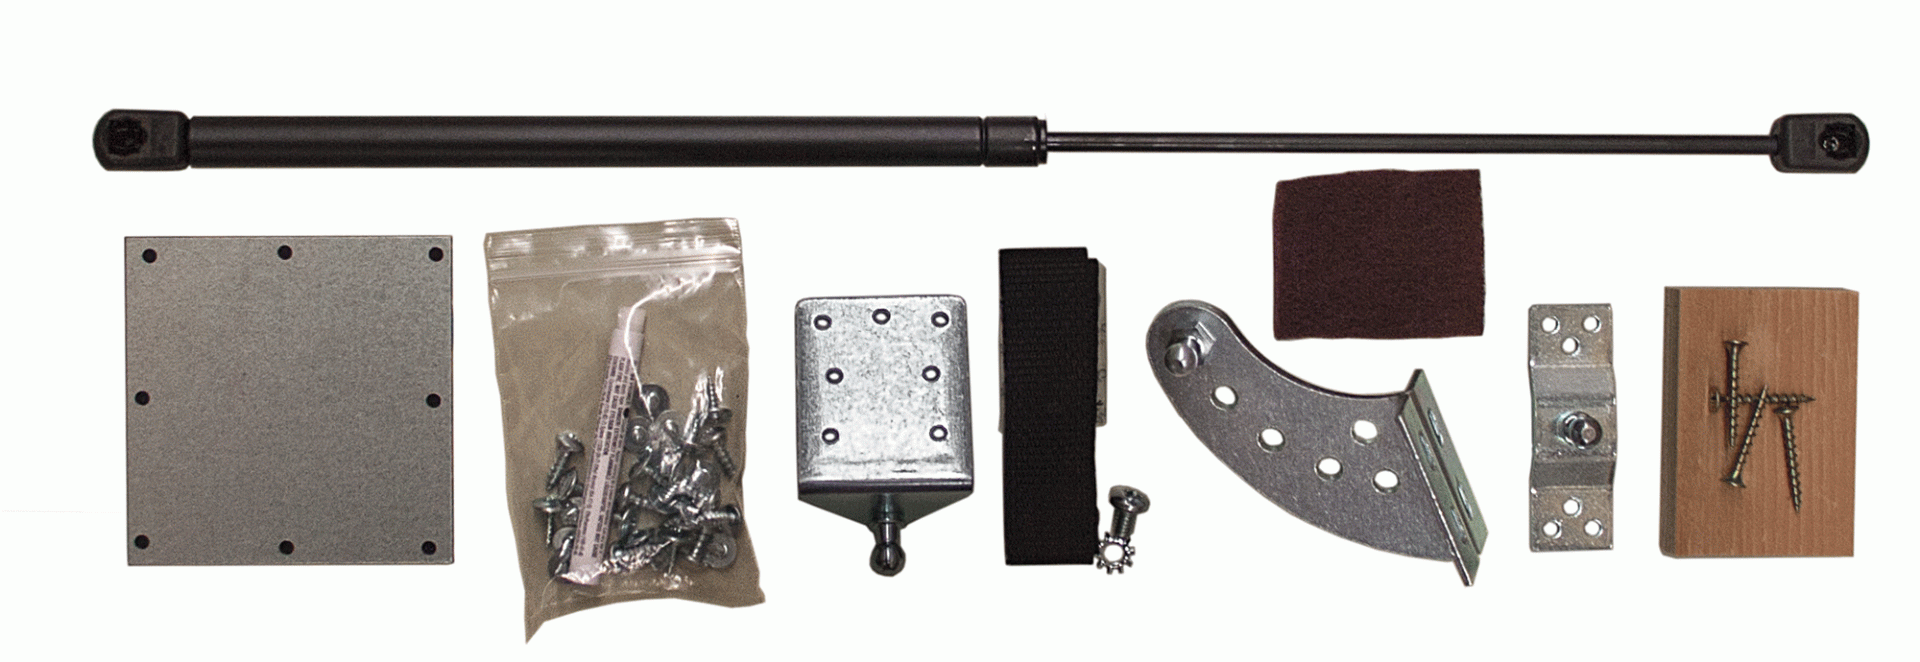 Hatchlift Products LLC | HLK-STD-S | Hydraulic Gas Spring Kit Standard Slideout For RV Doors 21" to 26" Tall